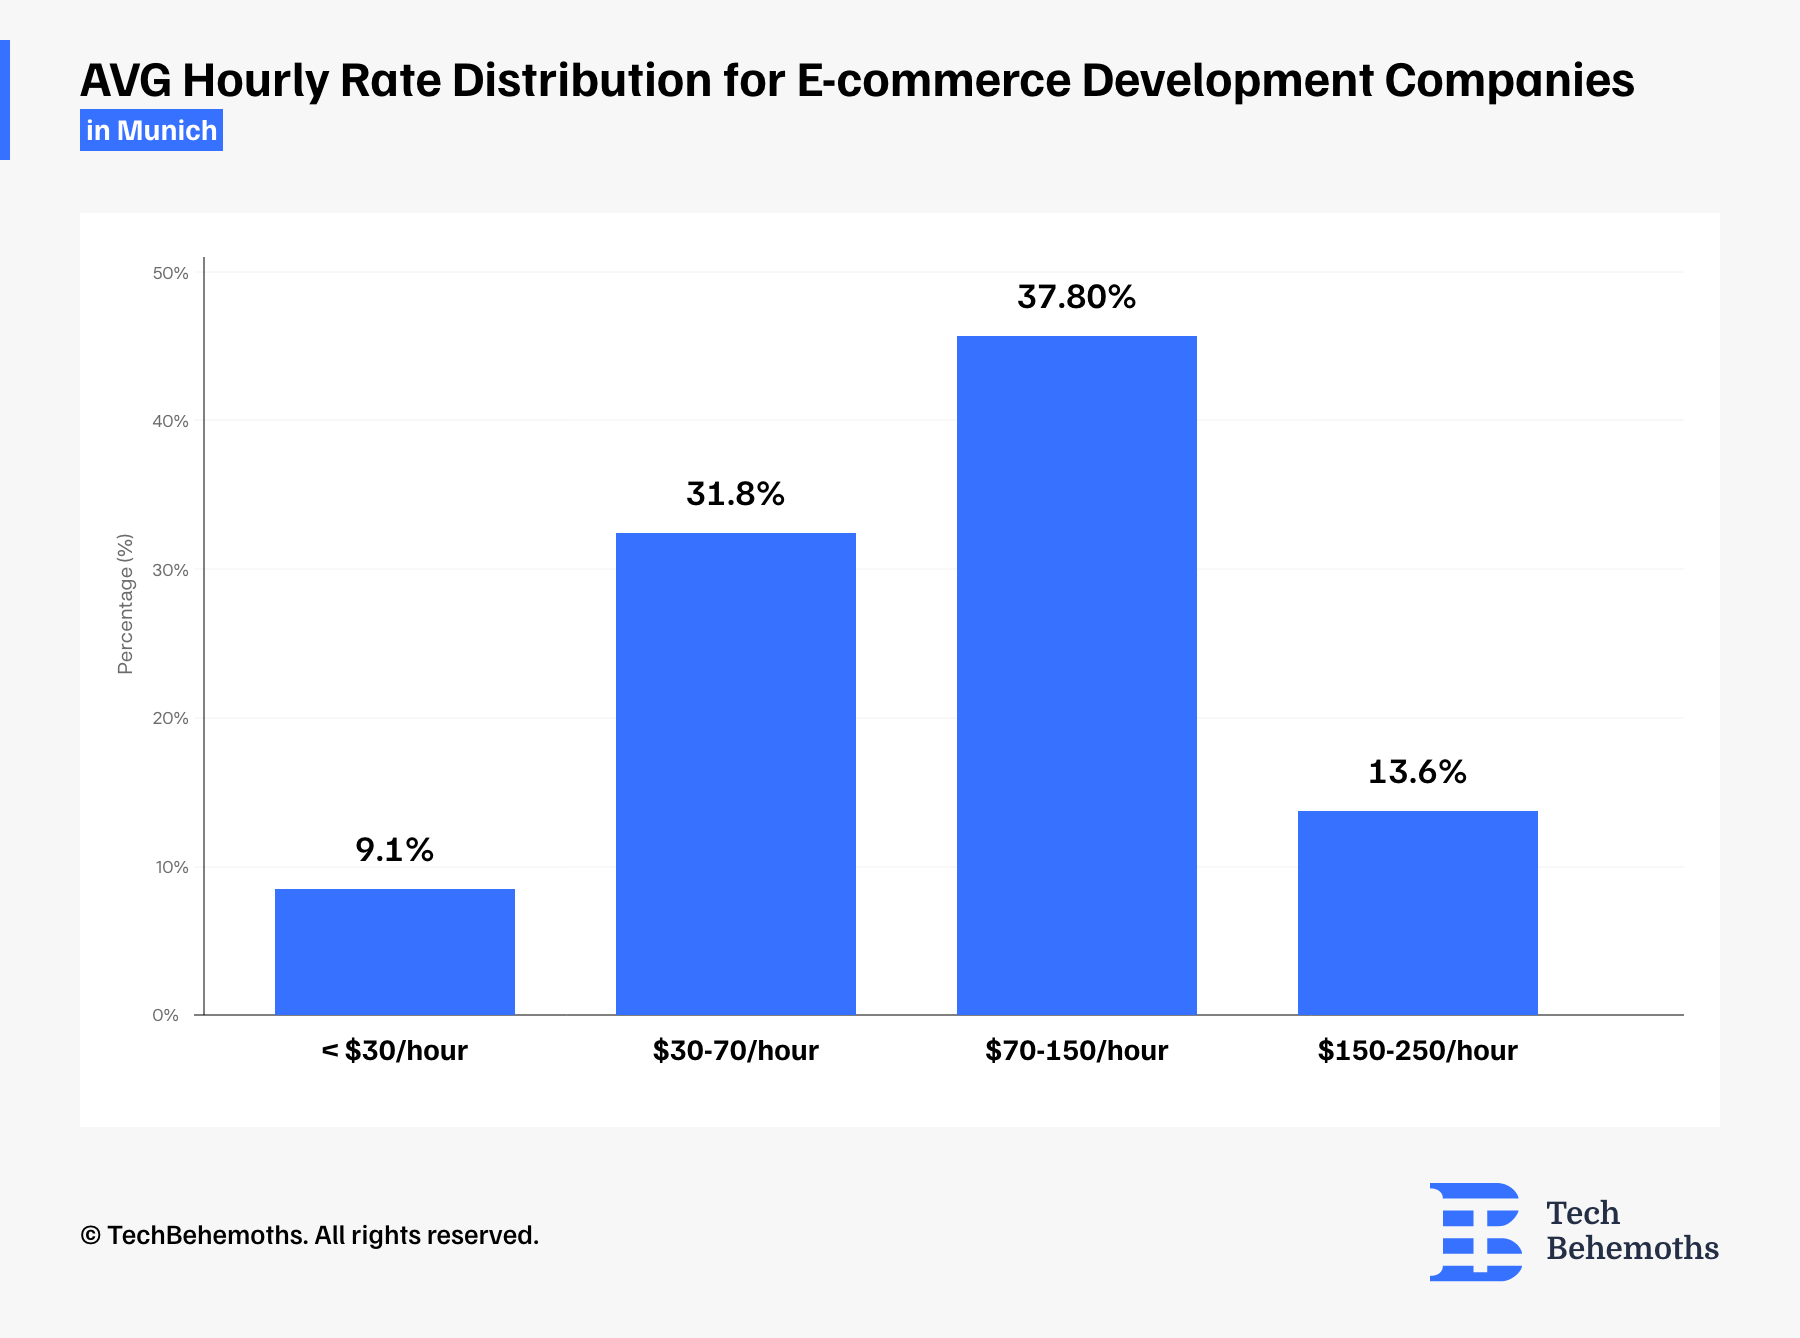 average hourly rate distribution for e-commerce development services in Munich, Germany